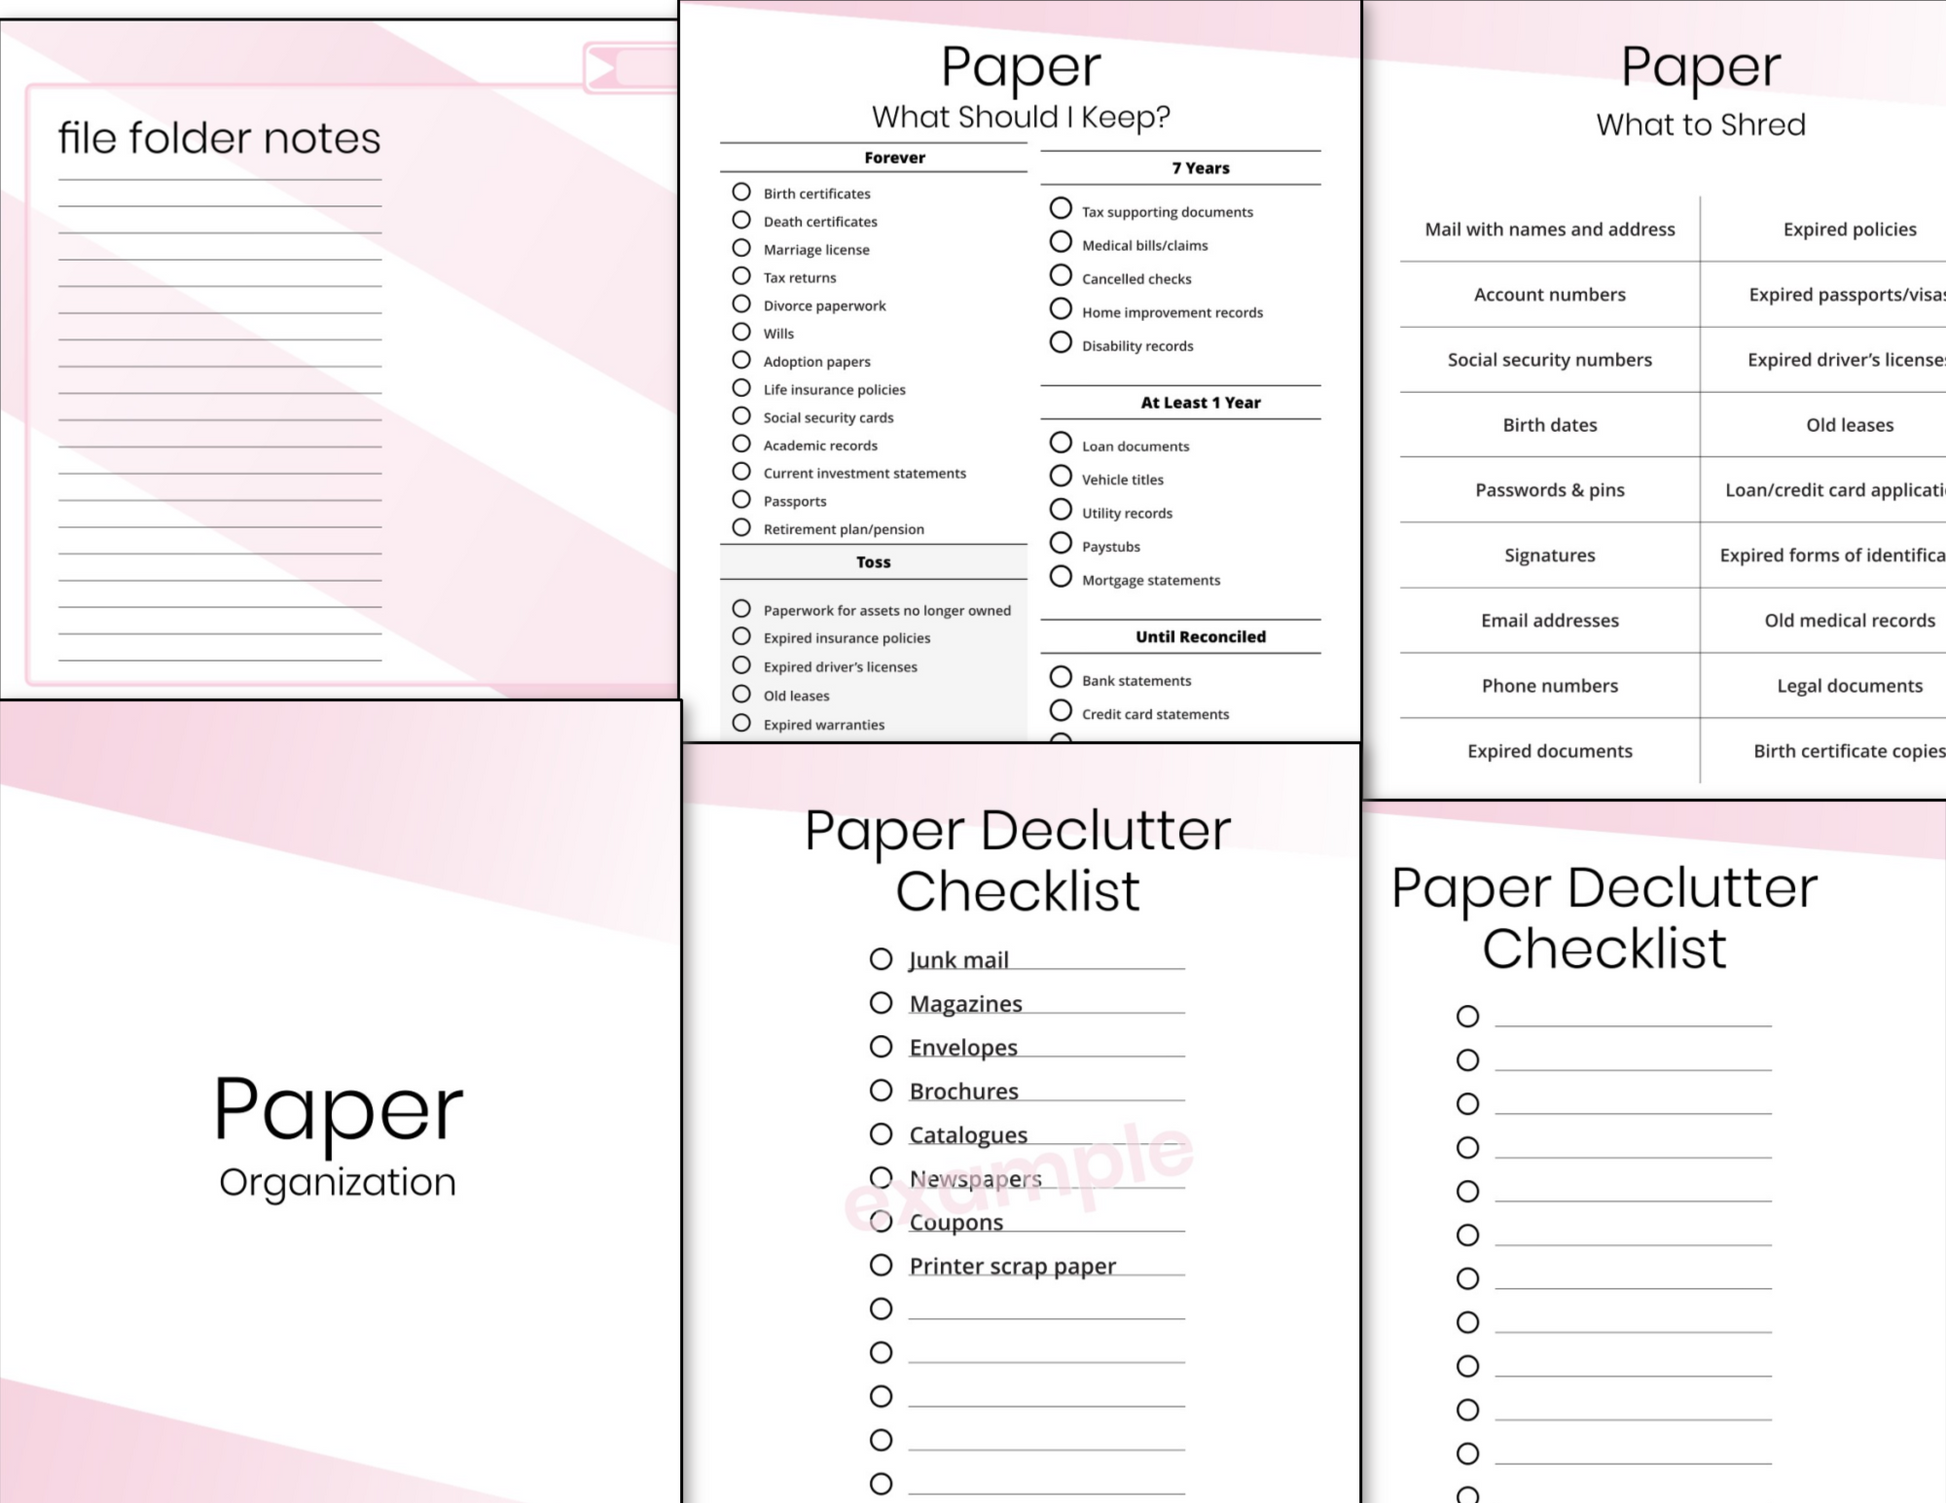 An image showing three digital documents titled "paper organization," "document checklist," and "Declutter Binder Fillable - Pink," with lists and checkboxes for organizing papers from the Organized 31 Shop.